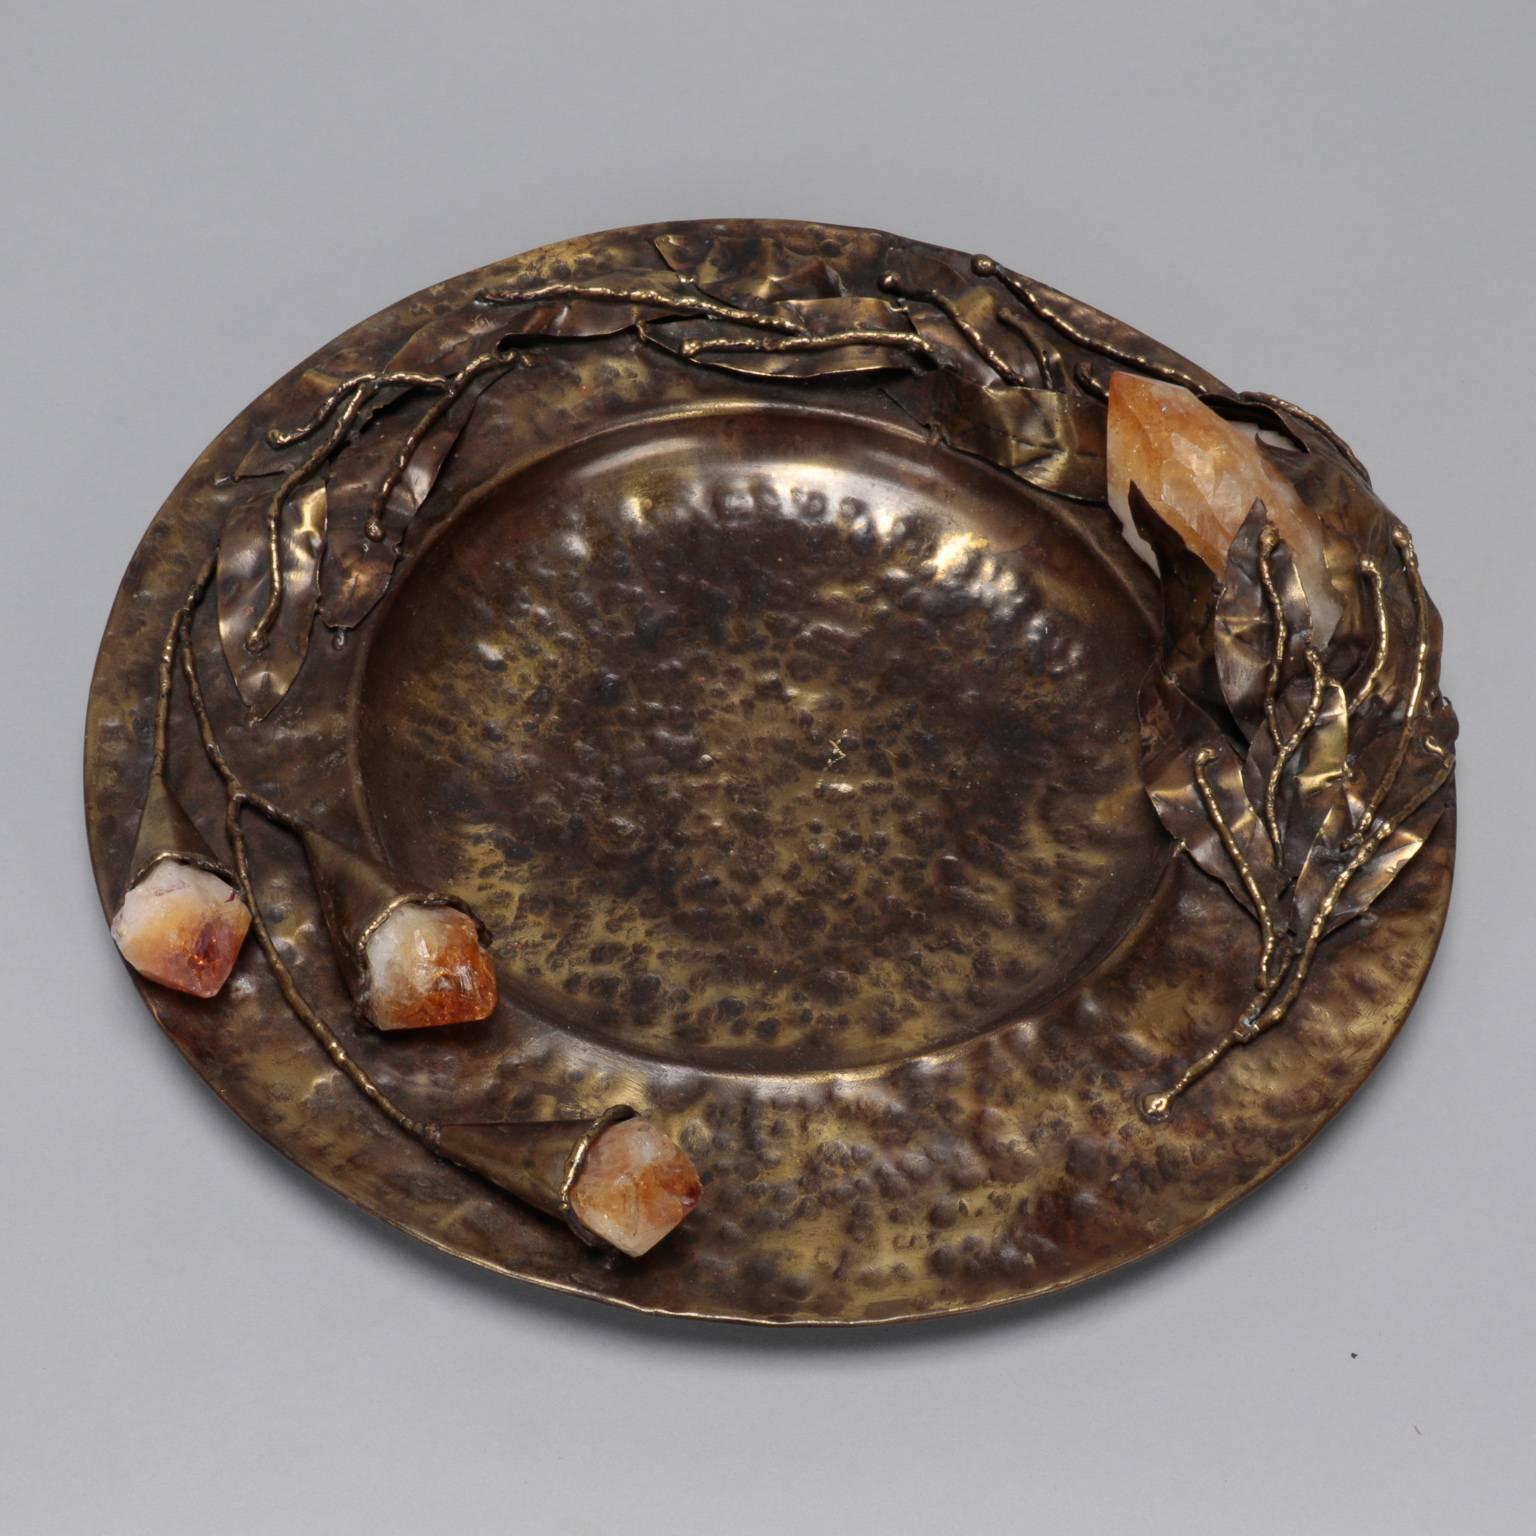 Found in Italy, this Mid-Century decorative plate dates from the 1970s. Plate is 13” diameter and has hammered texture with sculpted leaves and blooms with gold quartz crystal accents. Signed “Lionel” by the artist. We currently have several pieces